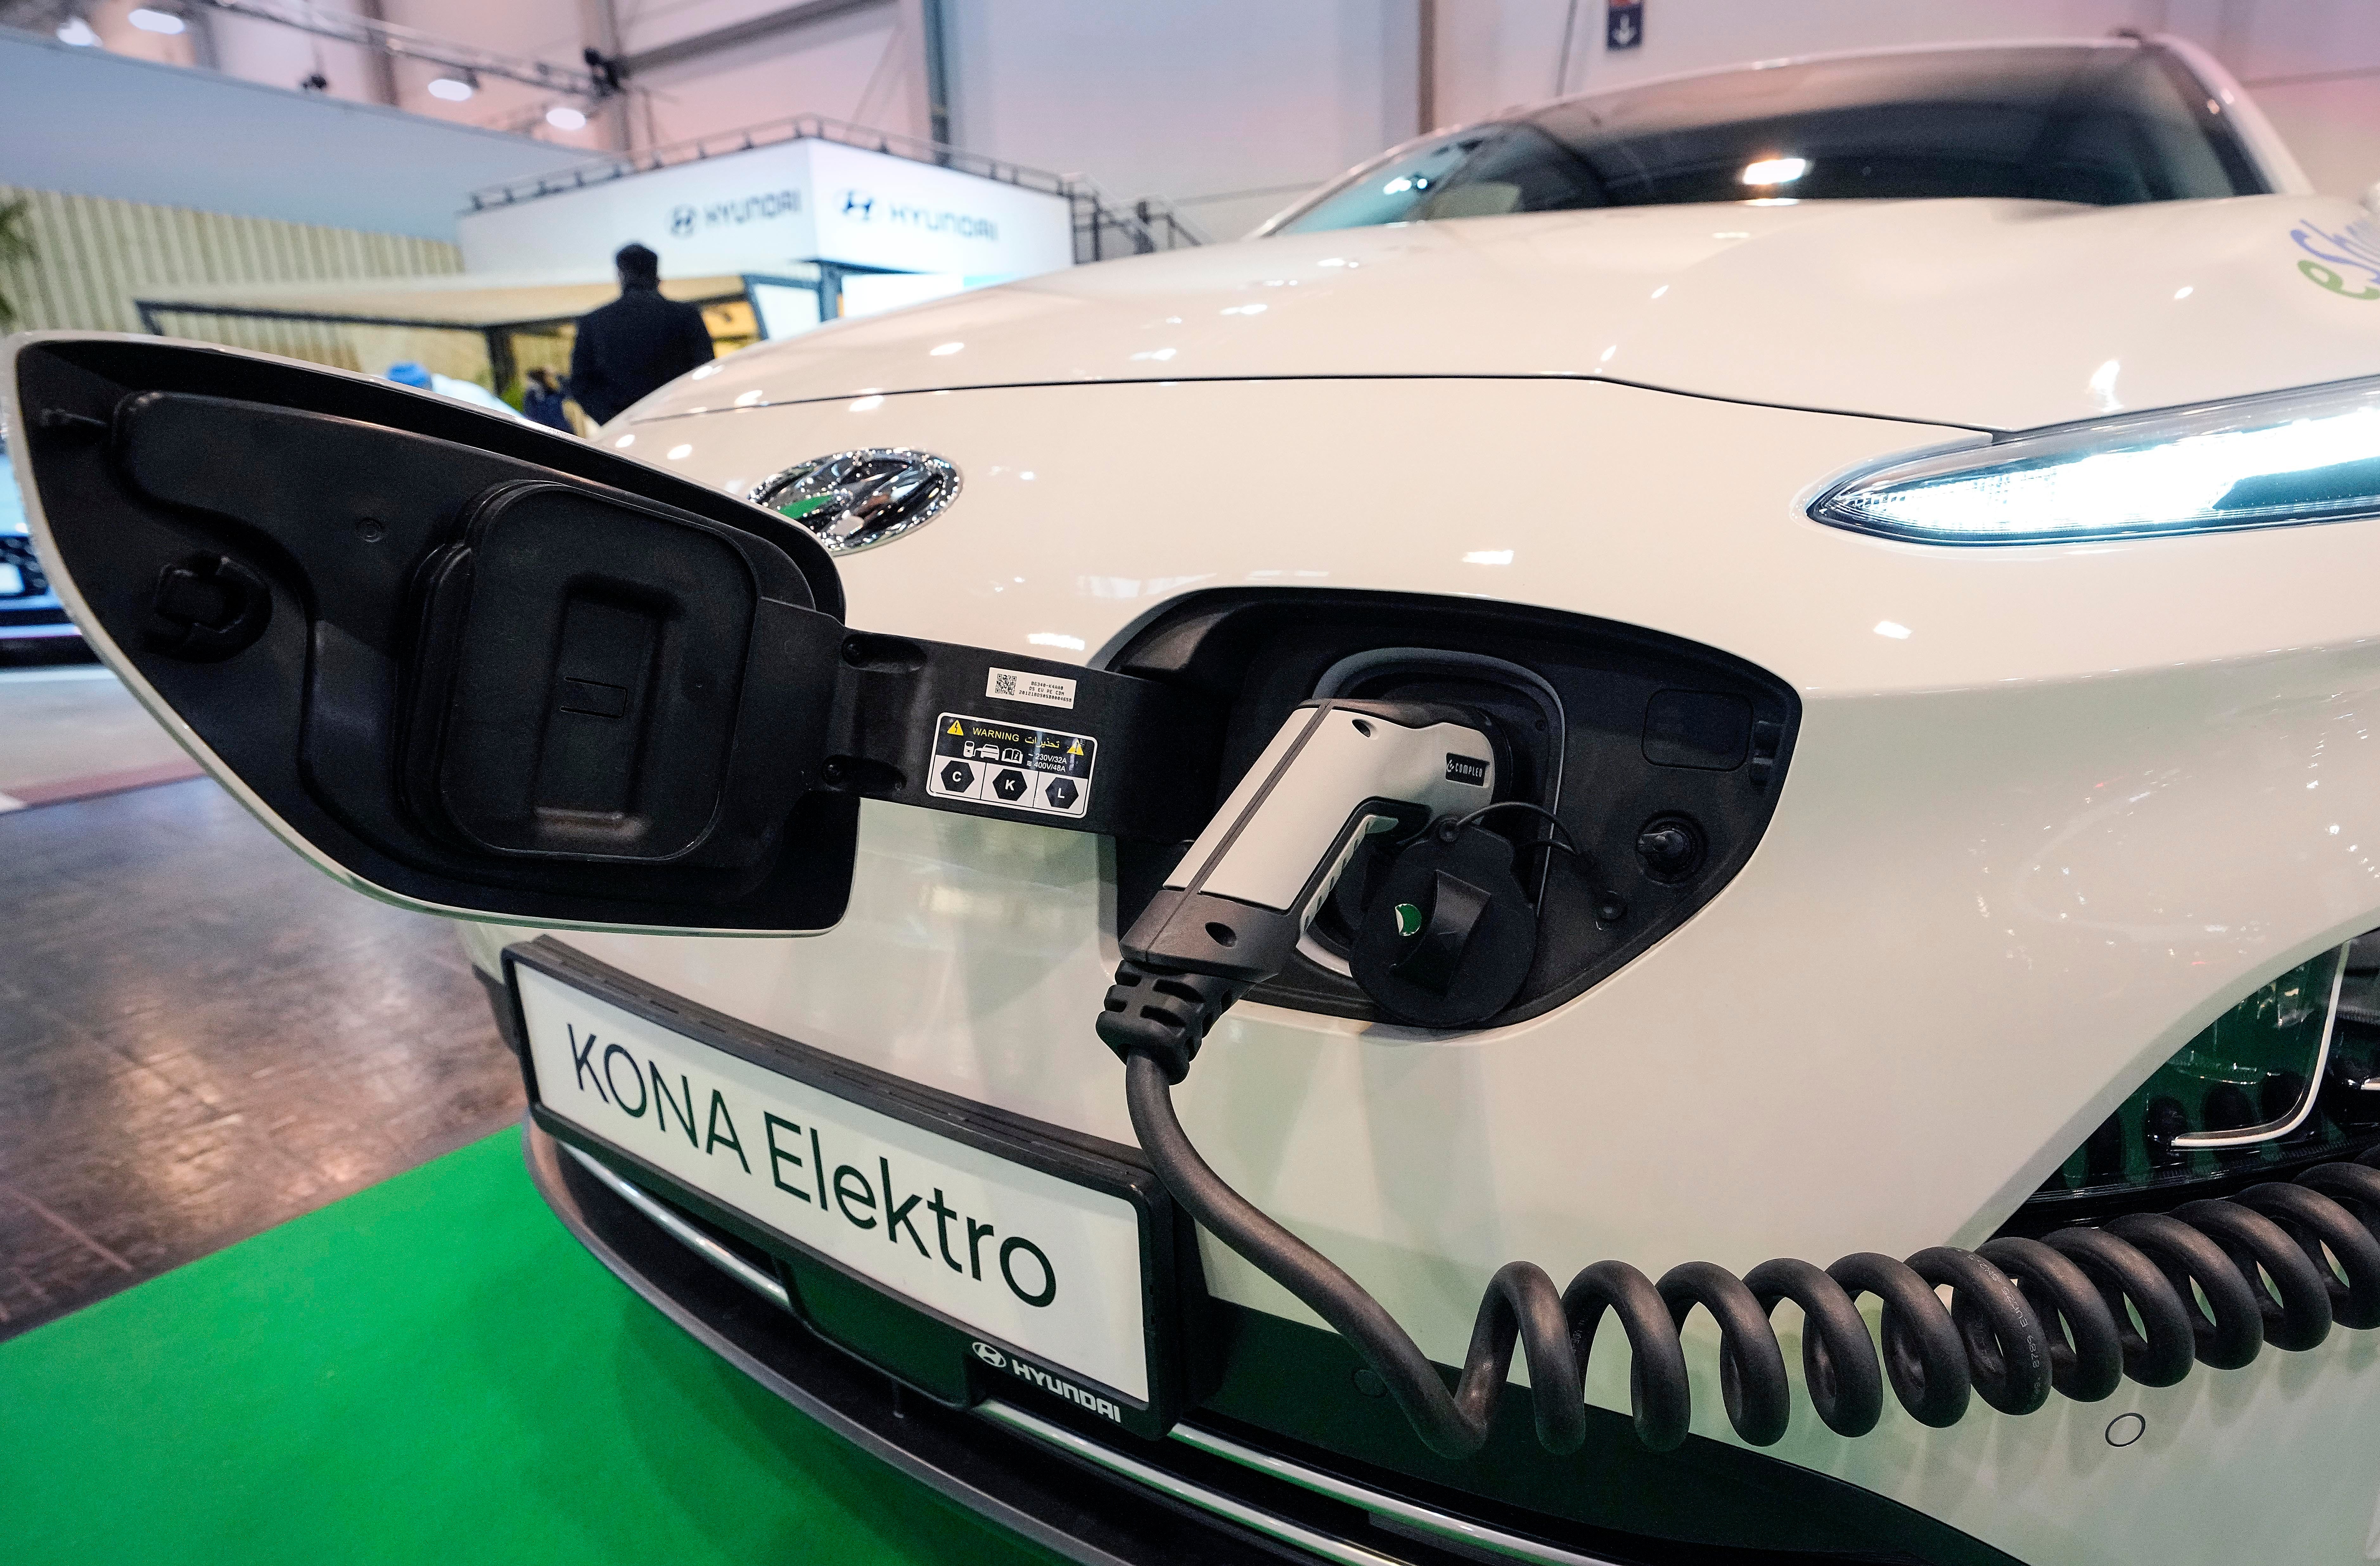 A Hyundai Kona electric car is charged at the Motor Show in Essen, Germany